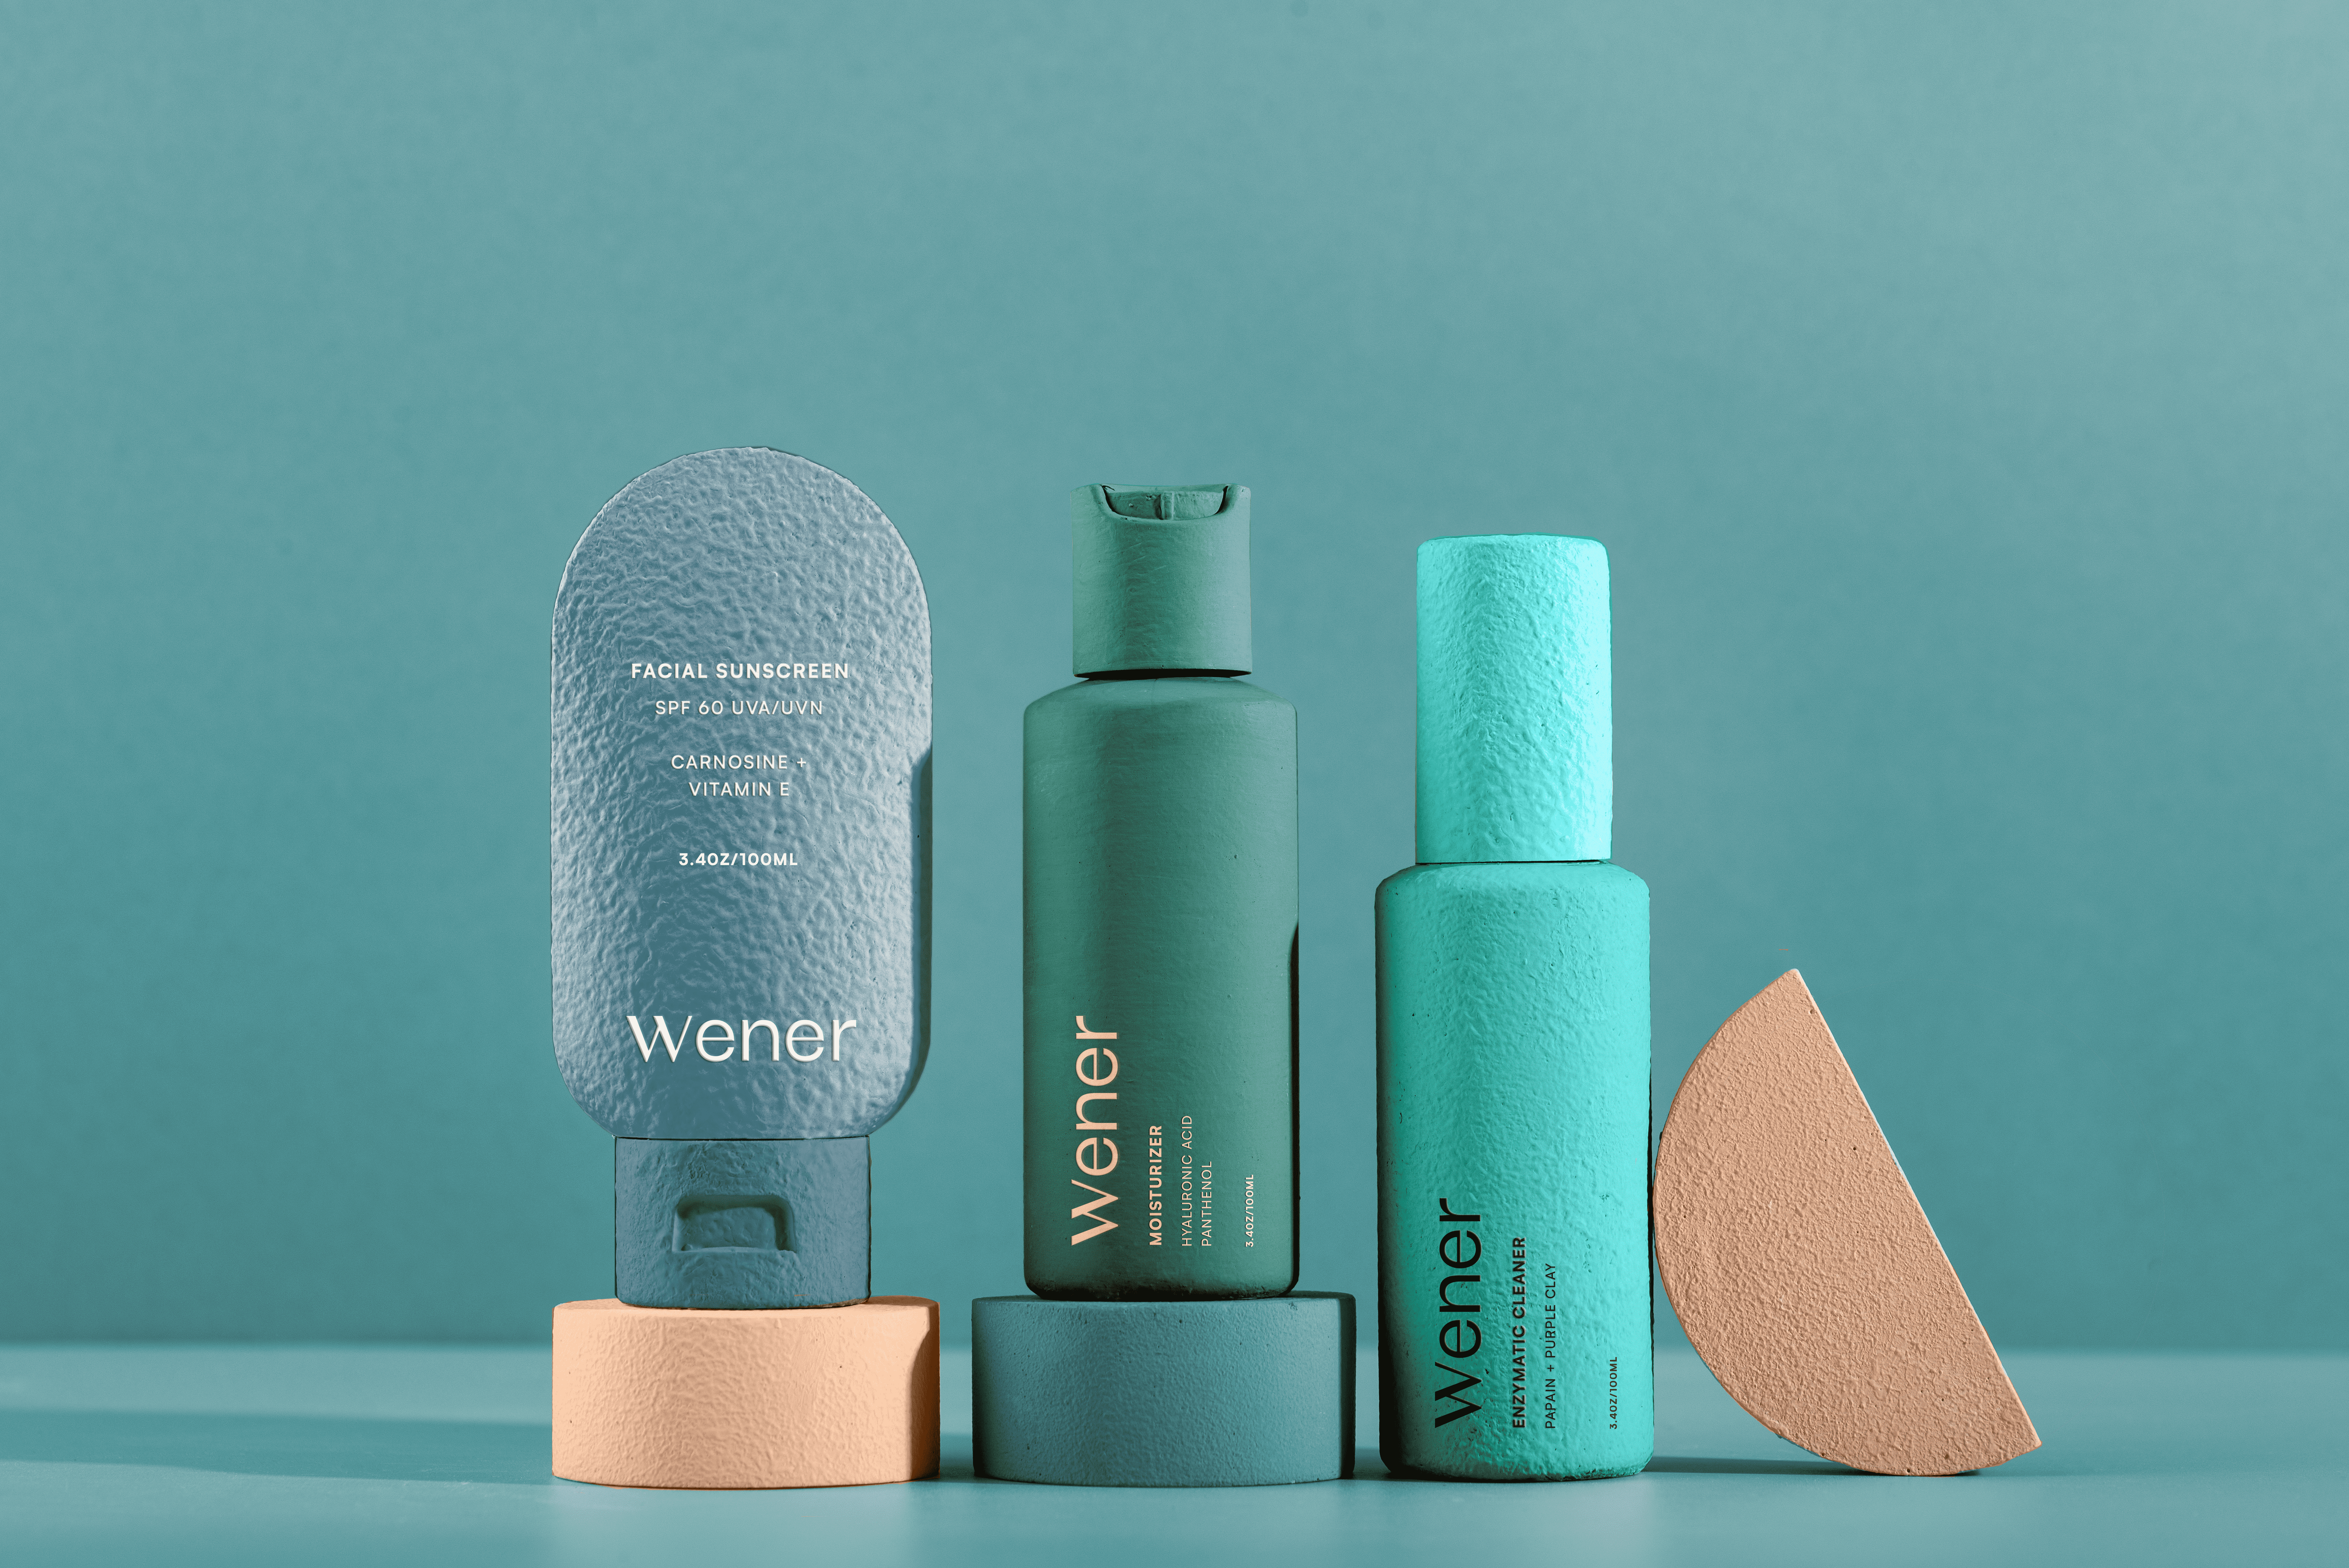 Funky Textures and Colors Lend an Especially Unique Look to Wener Skincare